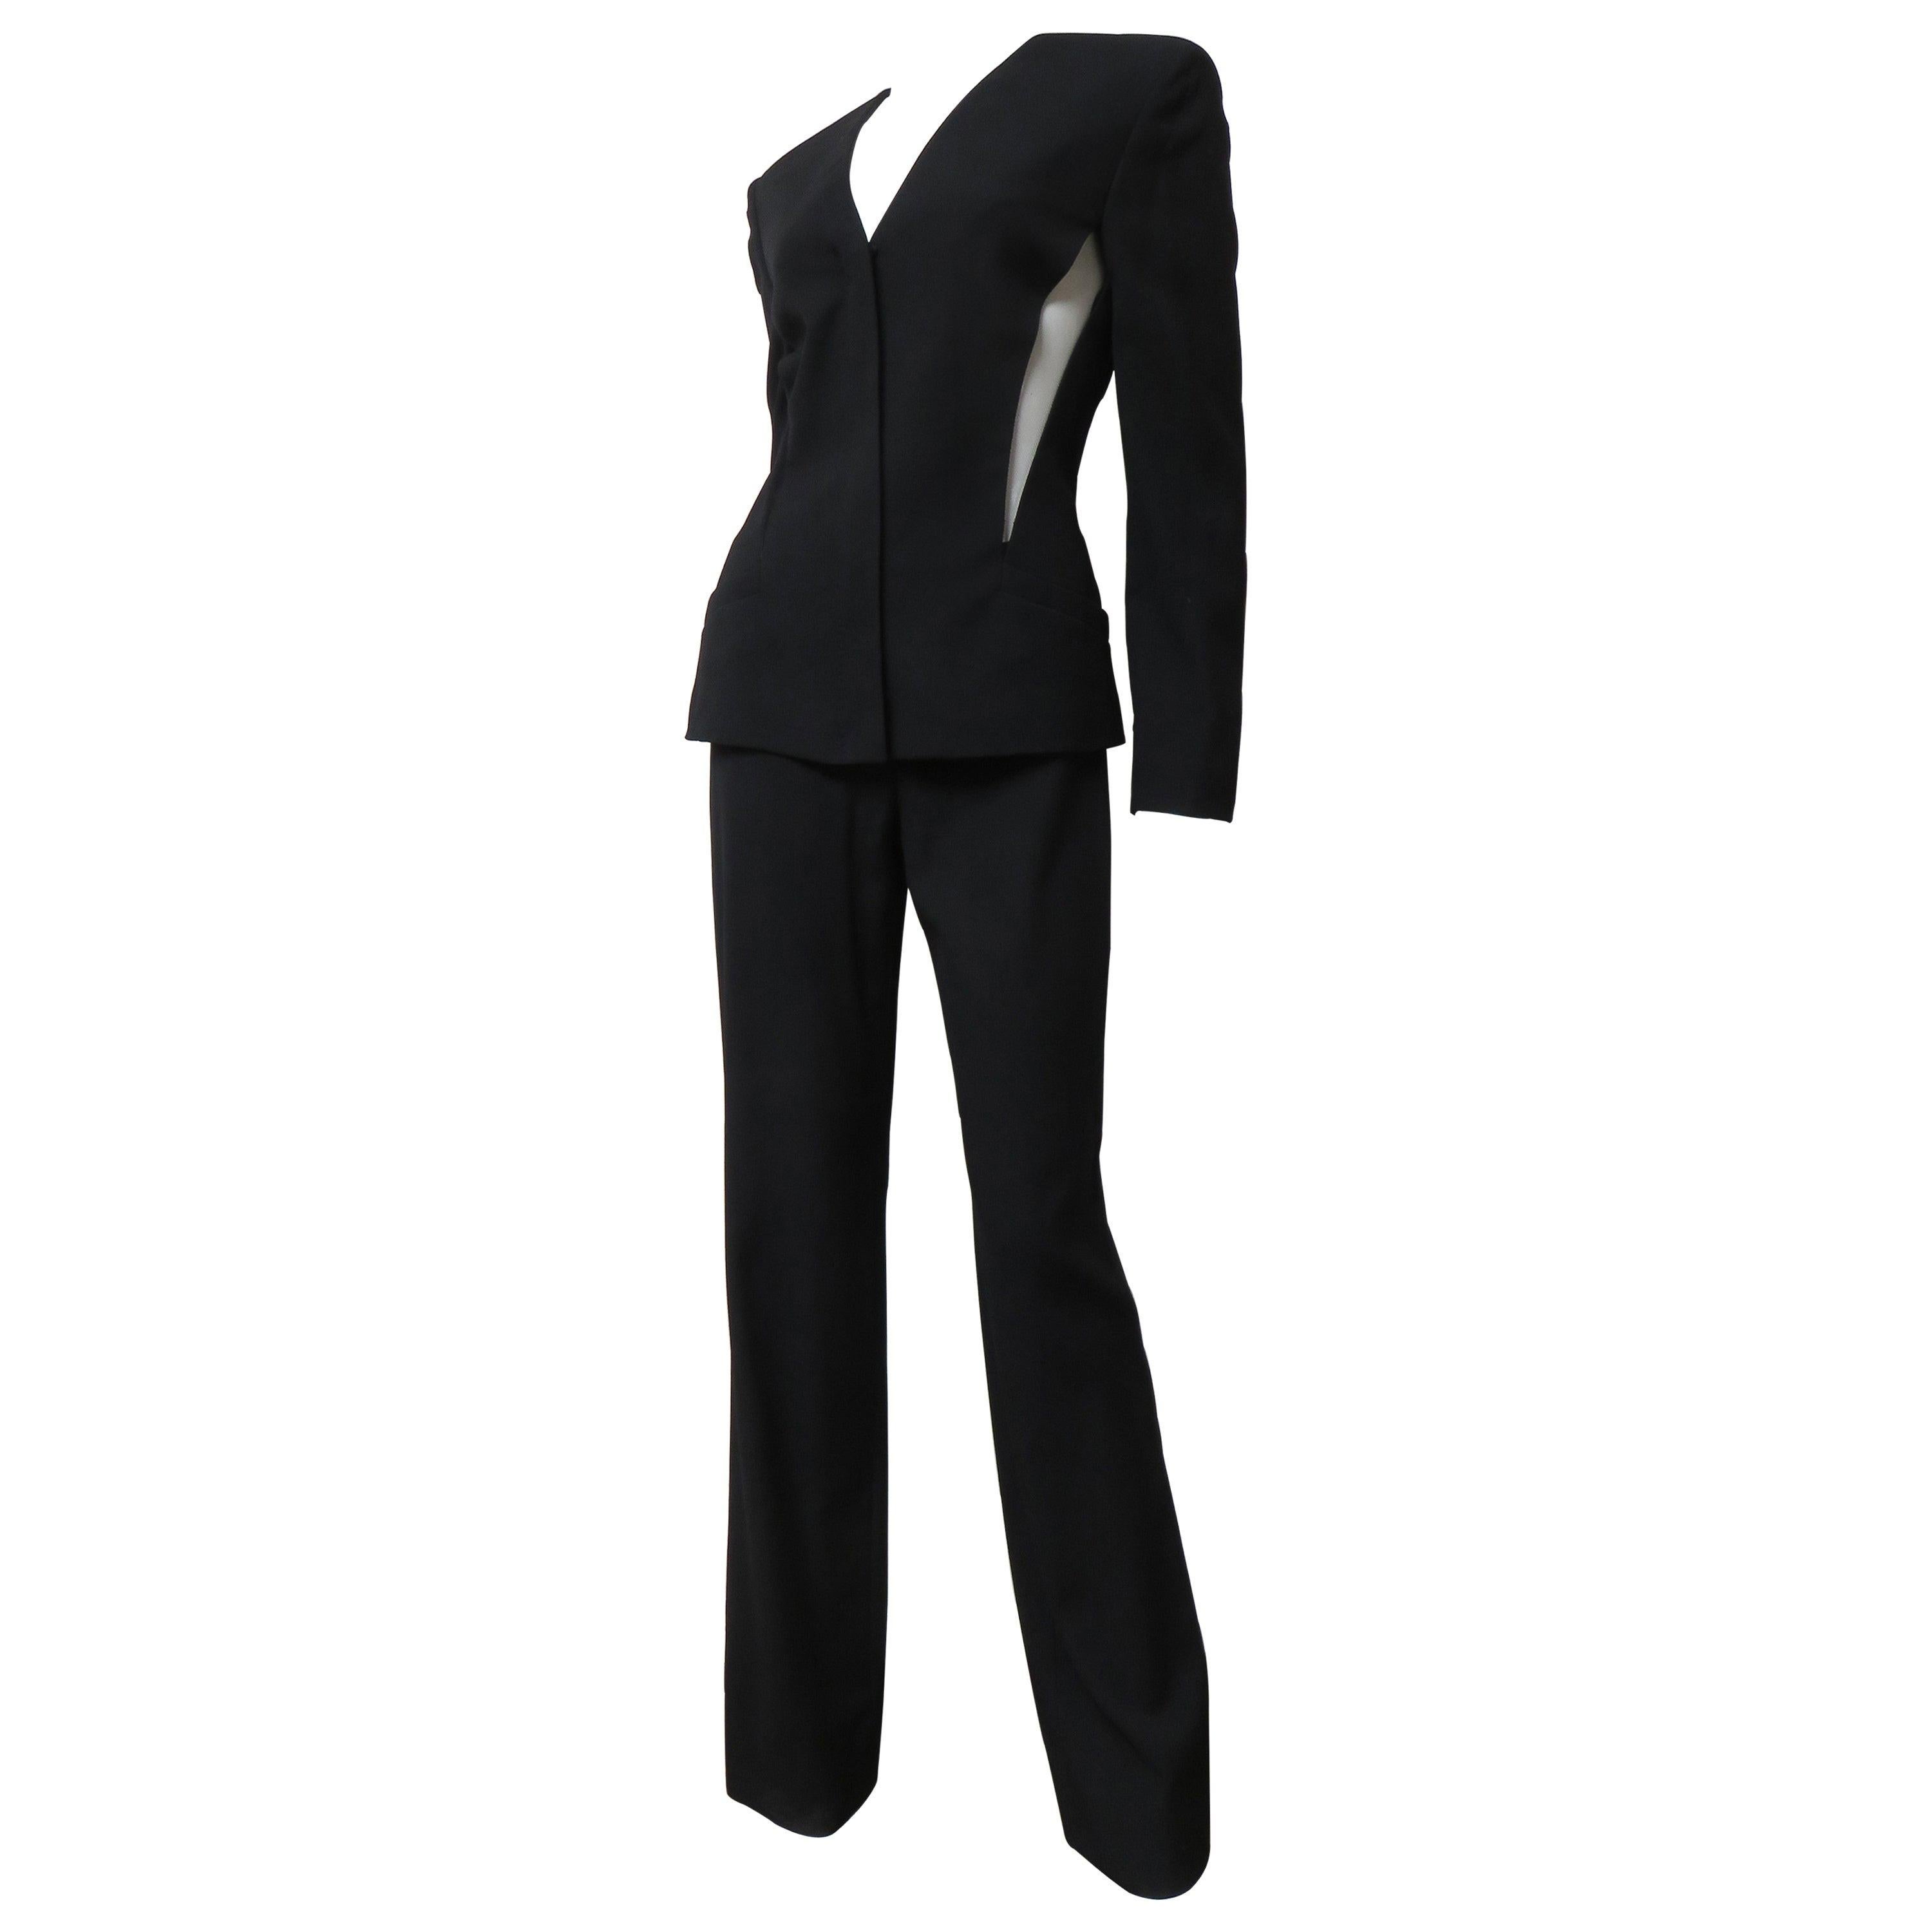 Gianni Versace Couture Silk Pant Suit with Cut outs 1990s